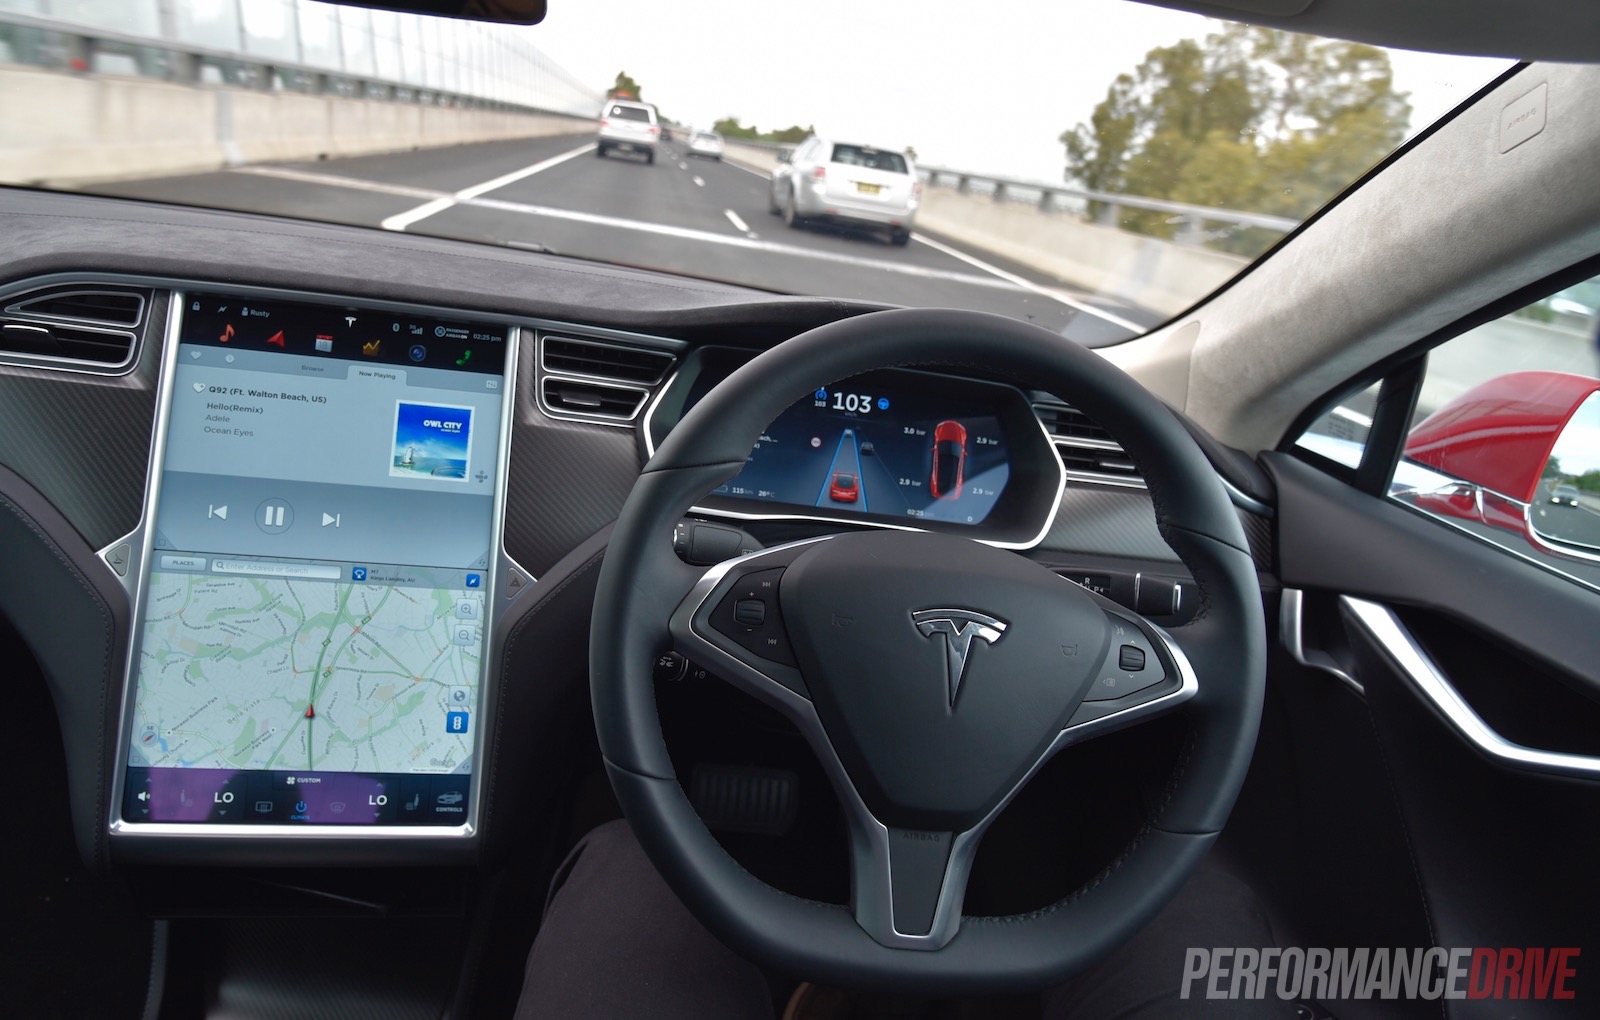 362,758 Tesla vehicles recalled for self-driving tech that can “act unsafe”